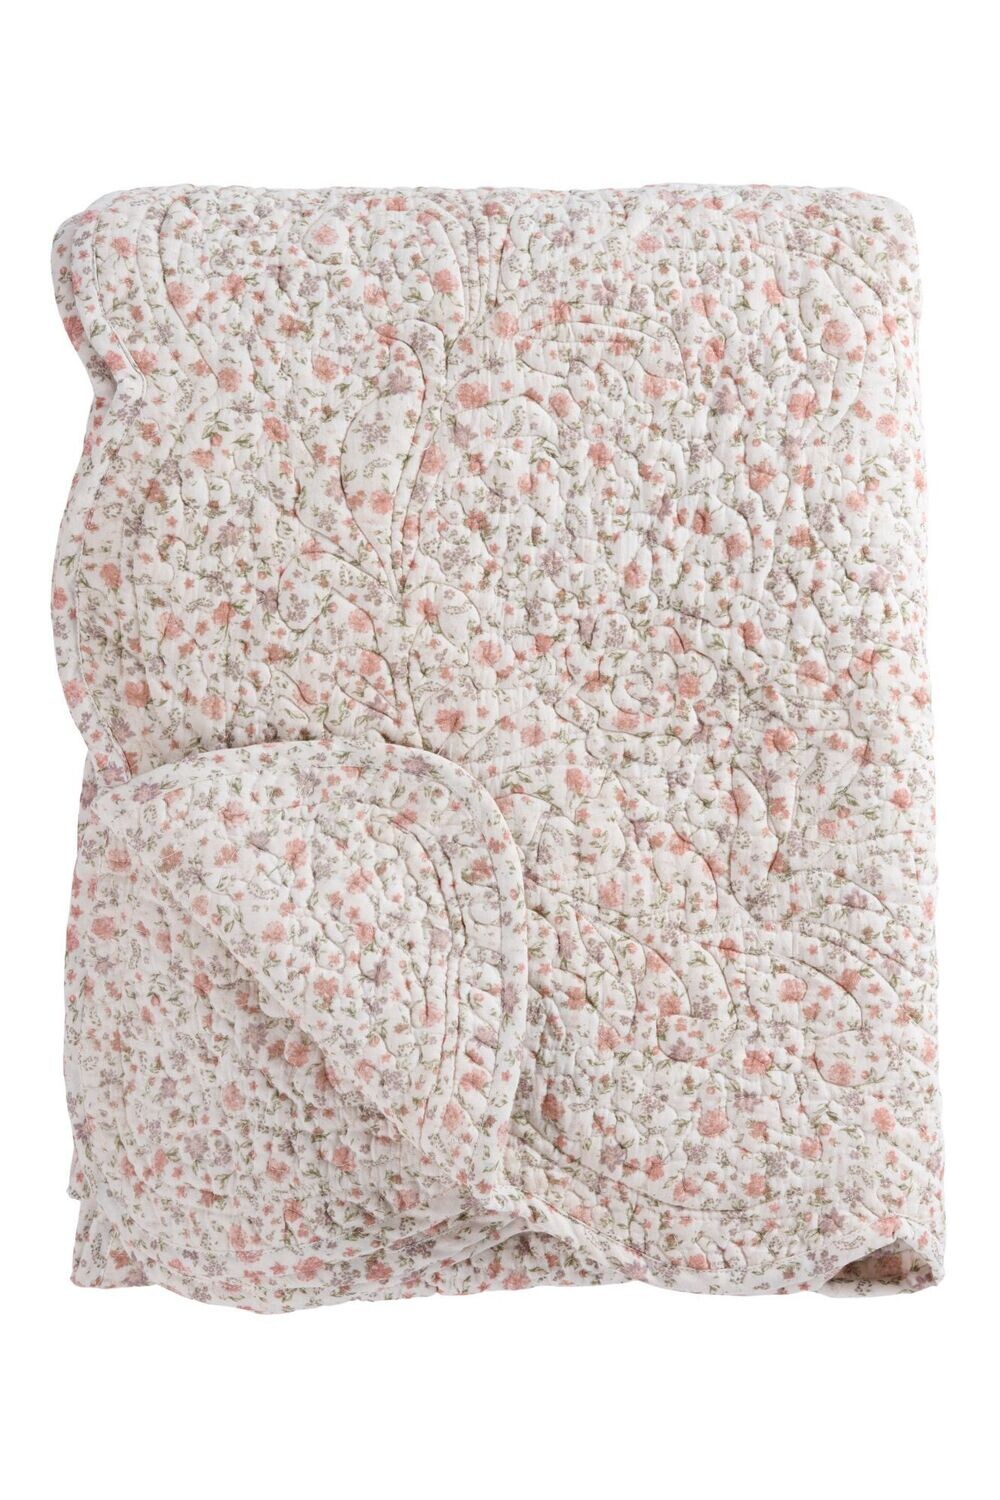 Femme Facon Rosy Blossom Quilted Throw